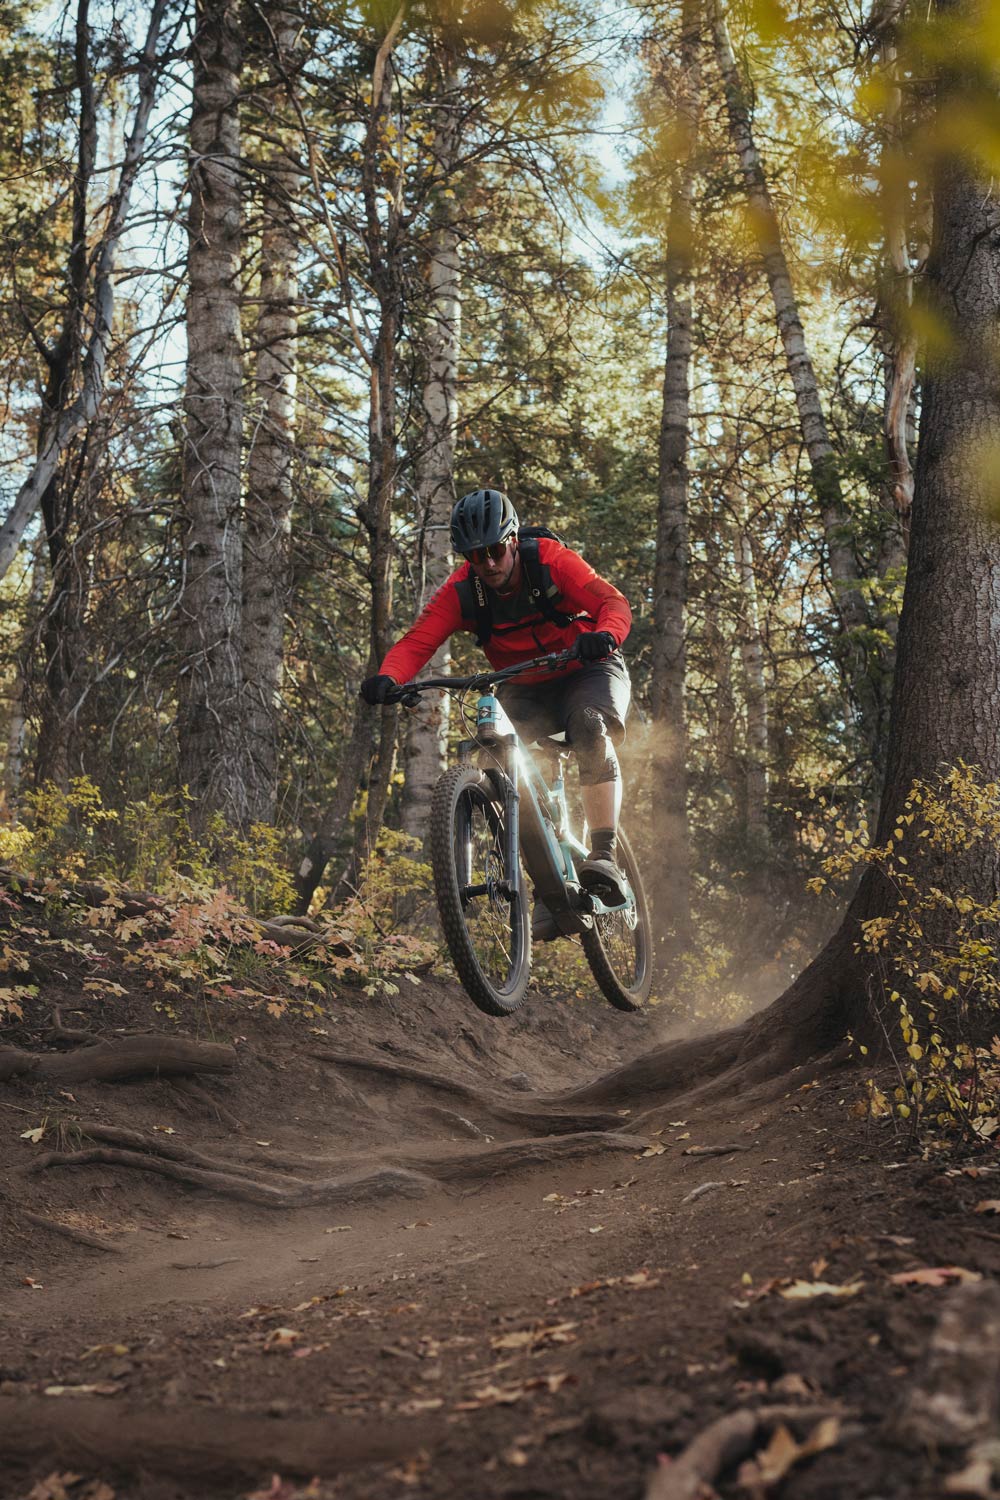 Dissected: Fezzari Timp Peak First Look | The Loam Wolf